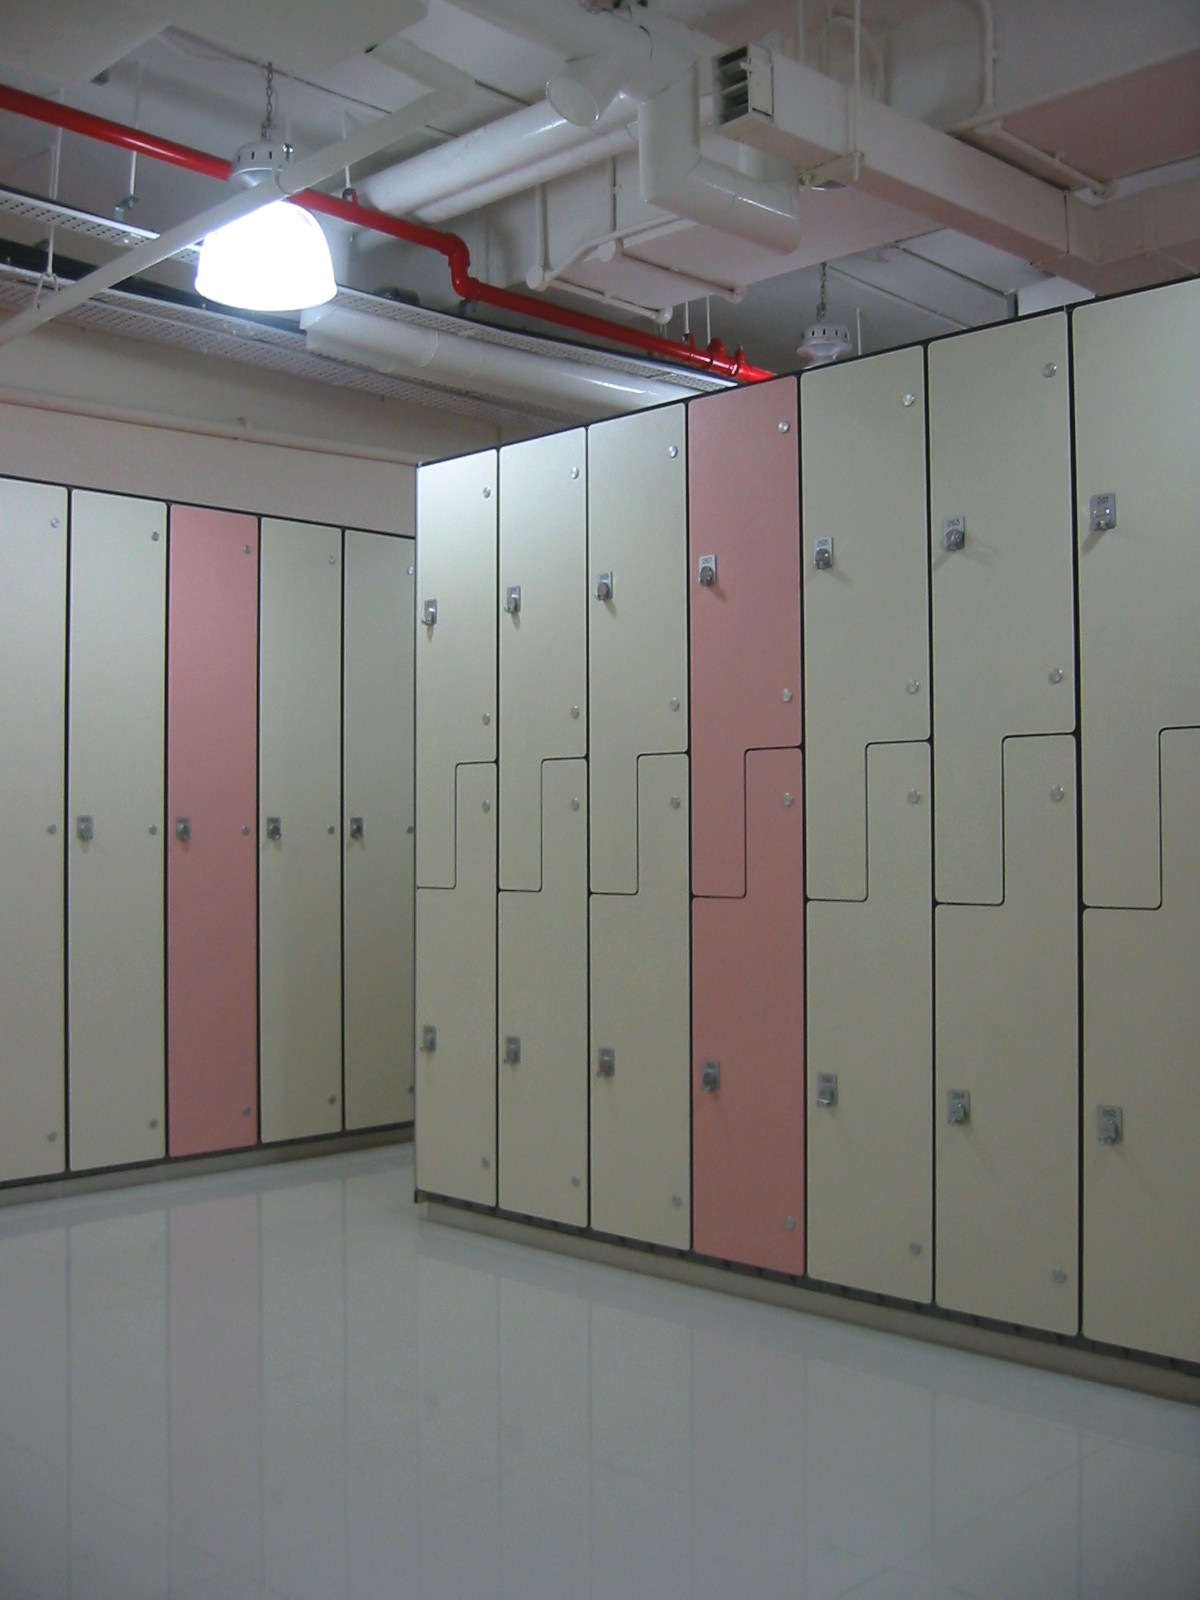 Shangri-la Hotel - BOH staff lockers, modular, easy install components with custom phennolic housing for ease of cleaning and maintenance.